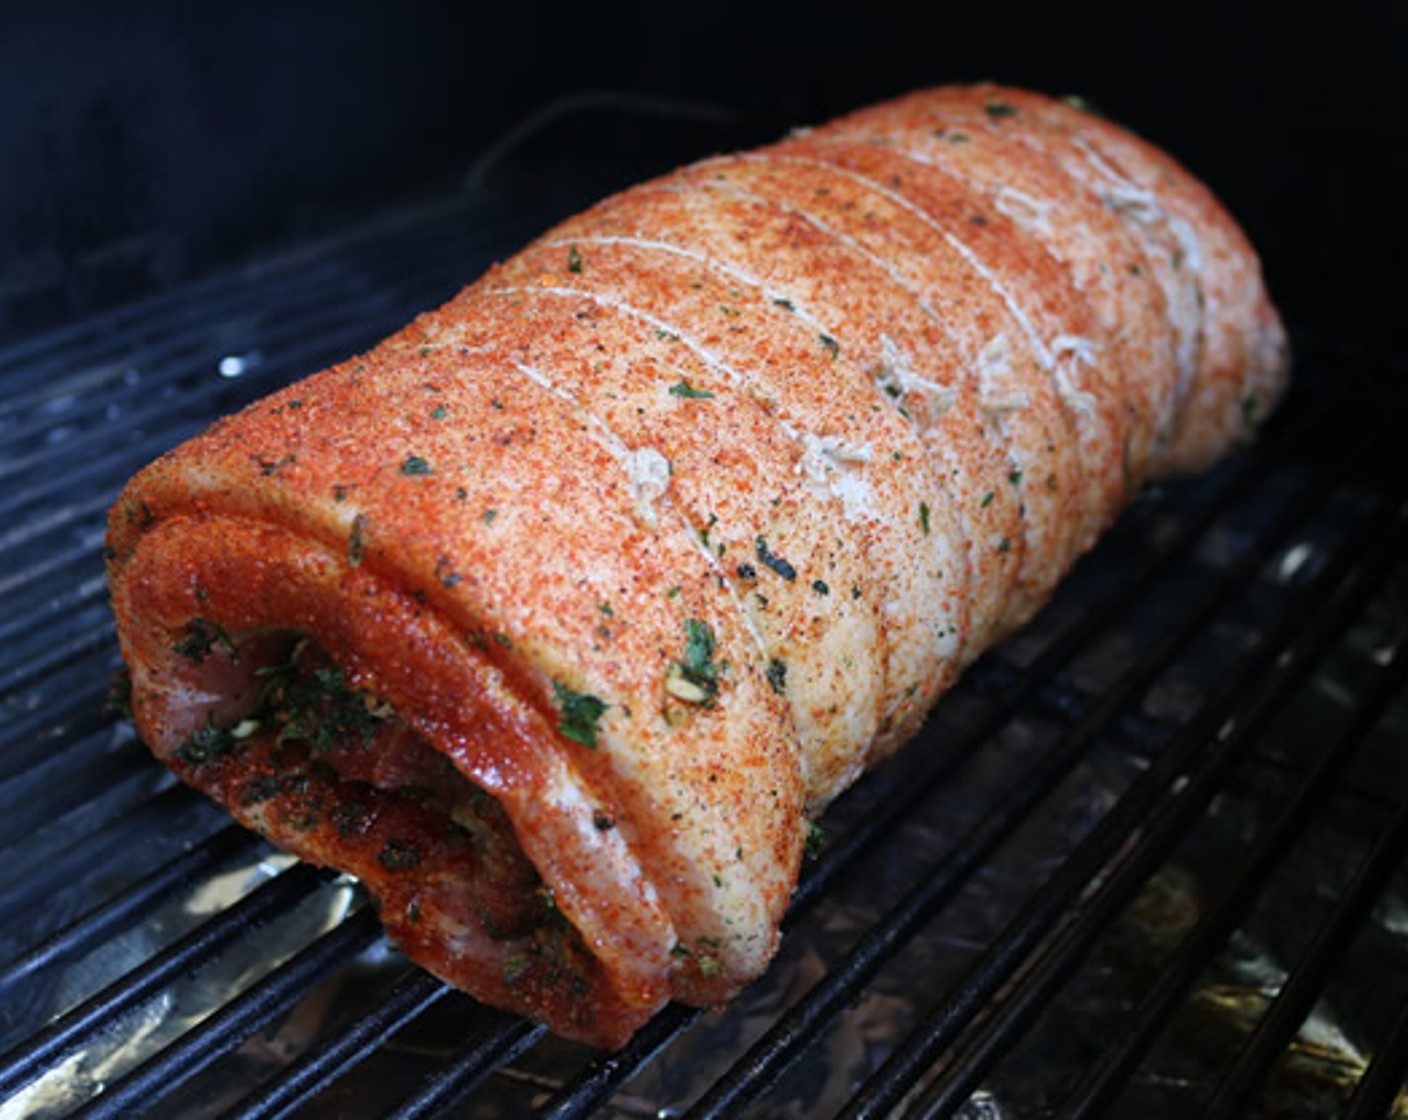 step 7 Now it’s time to get the Porchetta out on the smoker. For this cook I’m using my Yoder Smoker, but you can use any smoker. Get your smoker up to 250 degrees F (120 degrees C) and hold it steady.